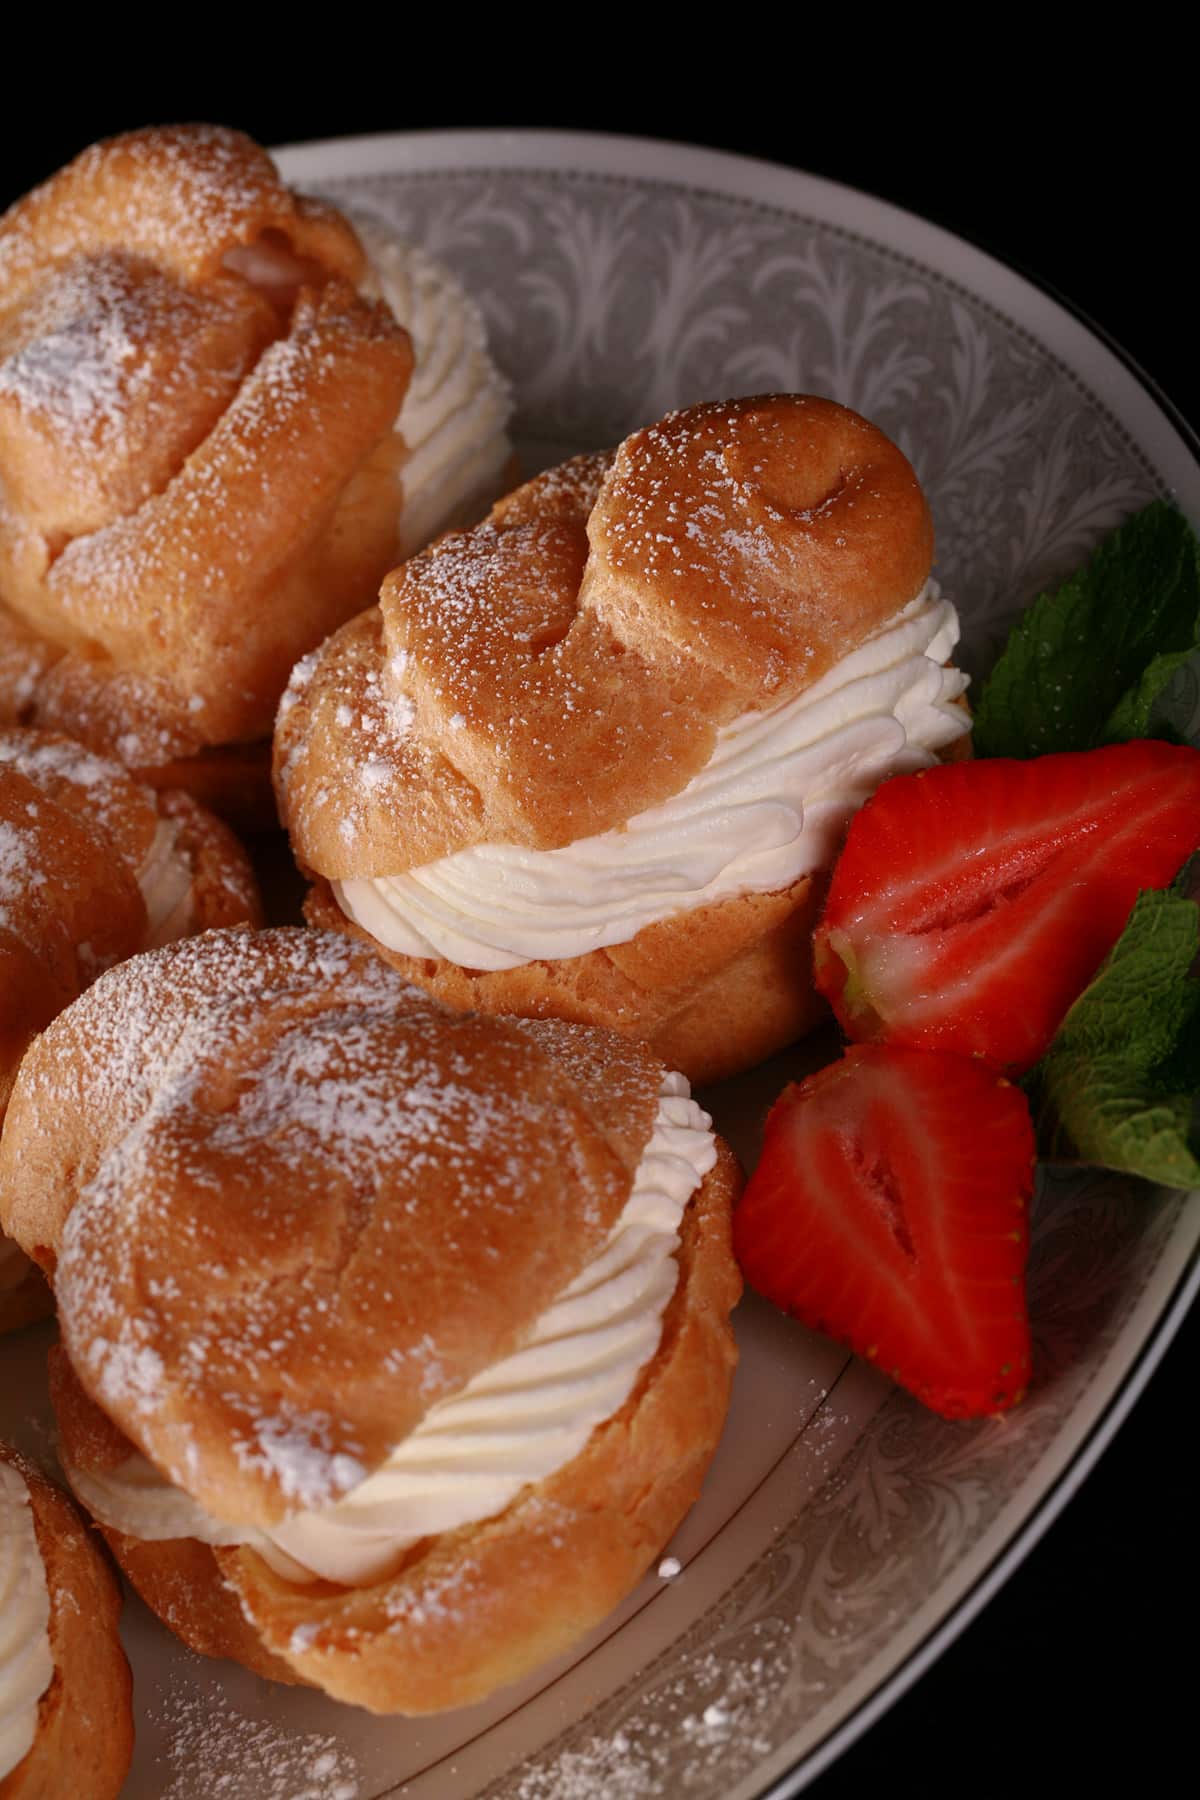 A large plate of cream puffs, dusted with powdered sugar and garnished with strawberries..